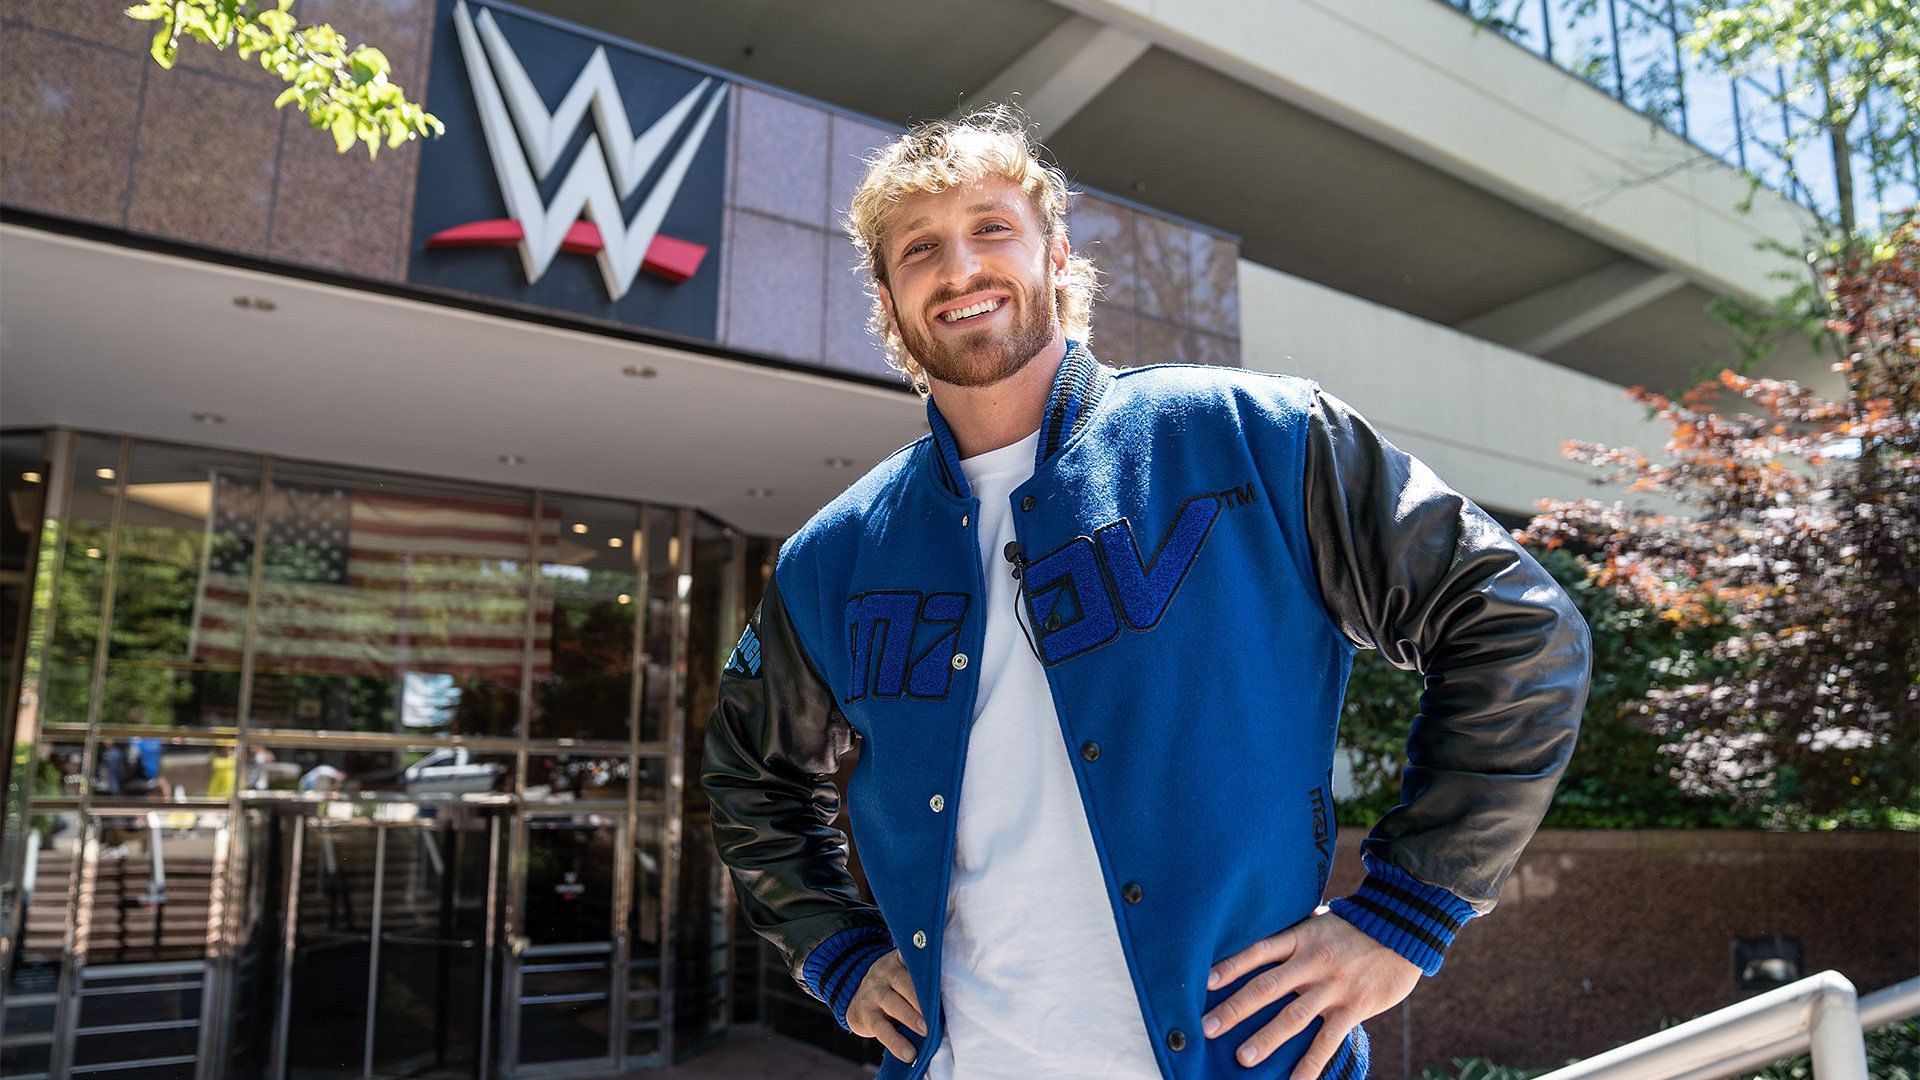 Logan Paul recently signed with WWE